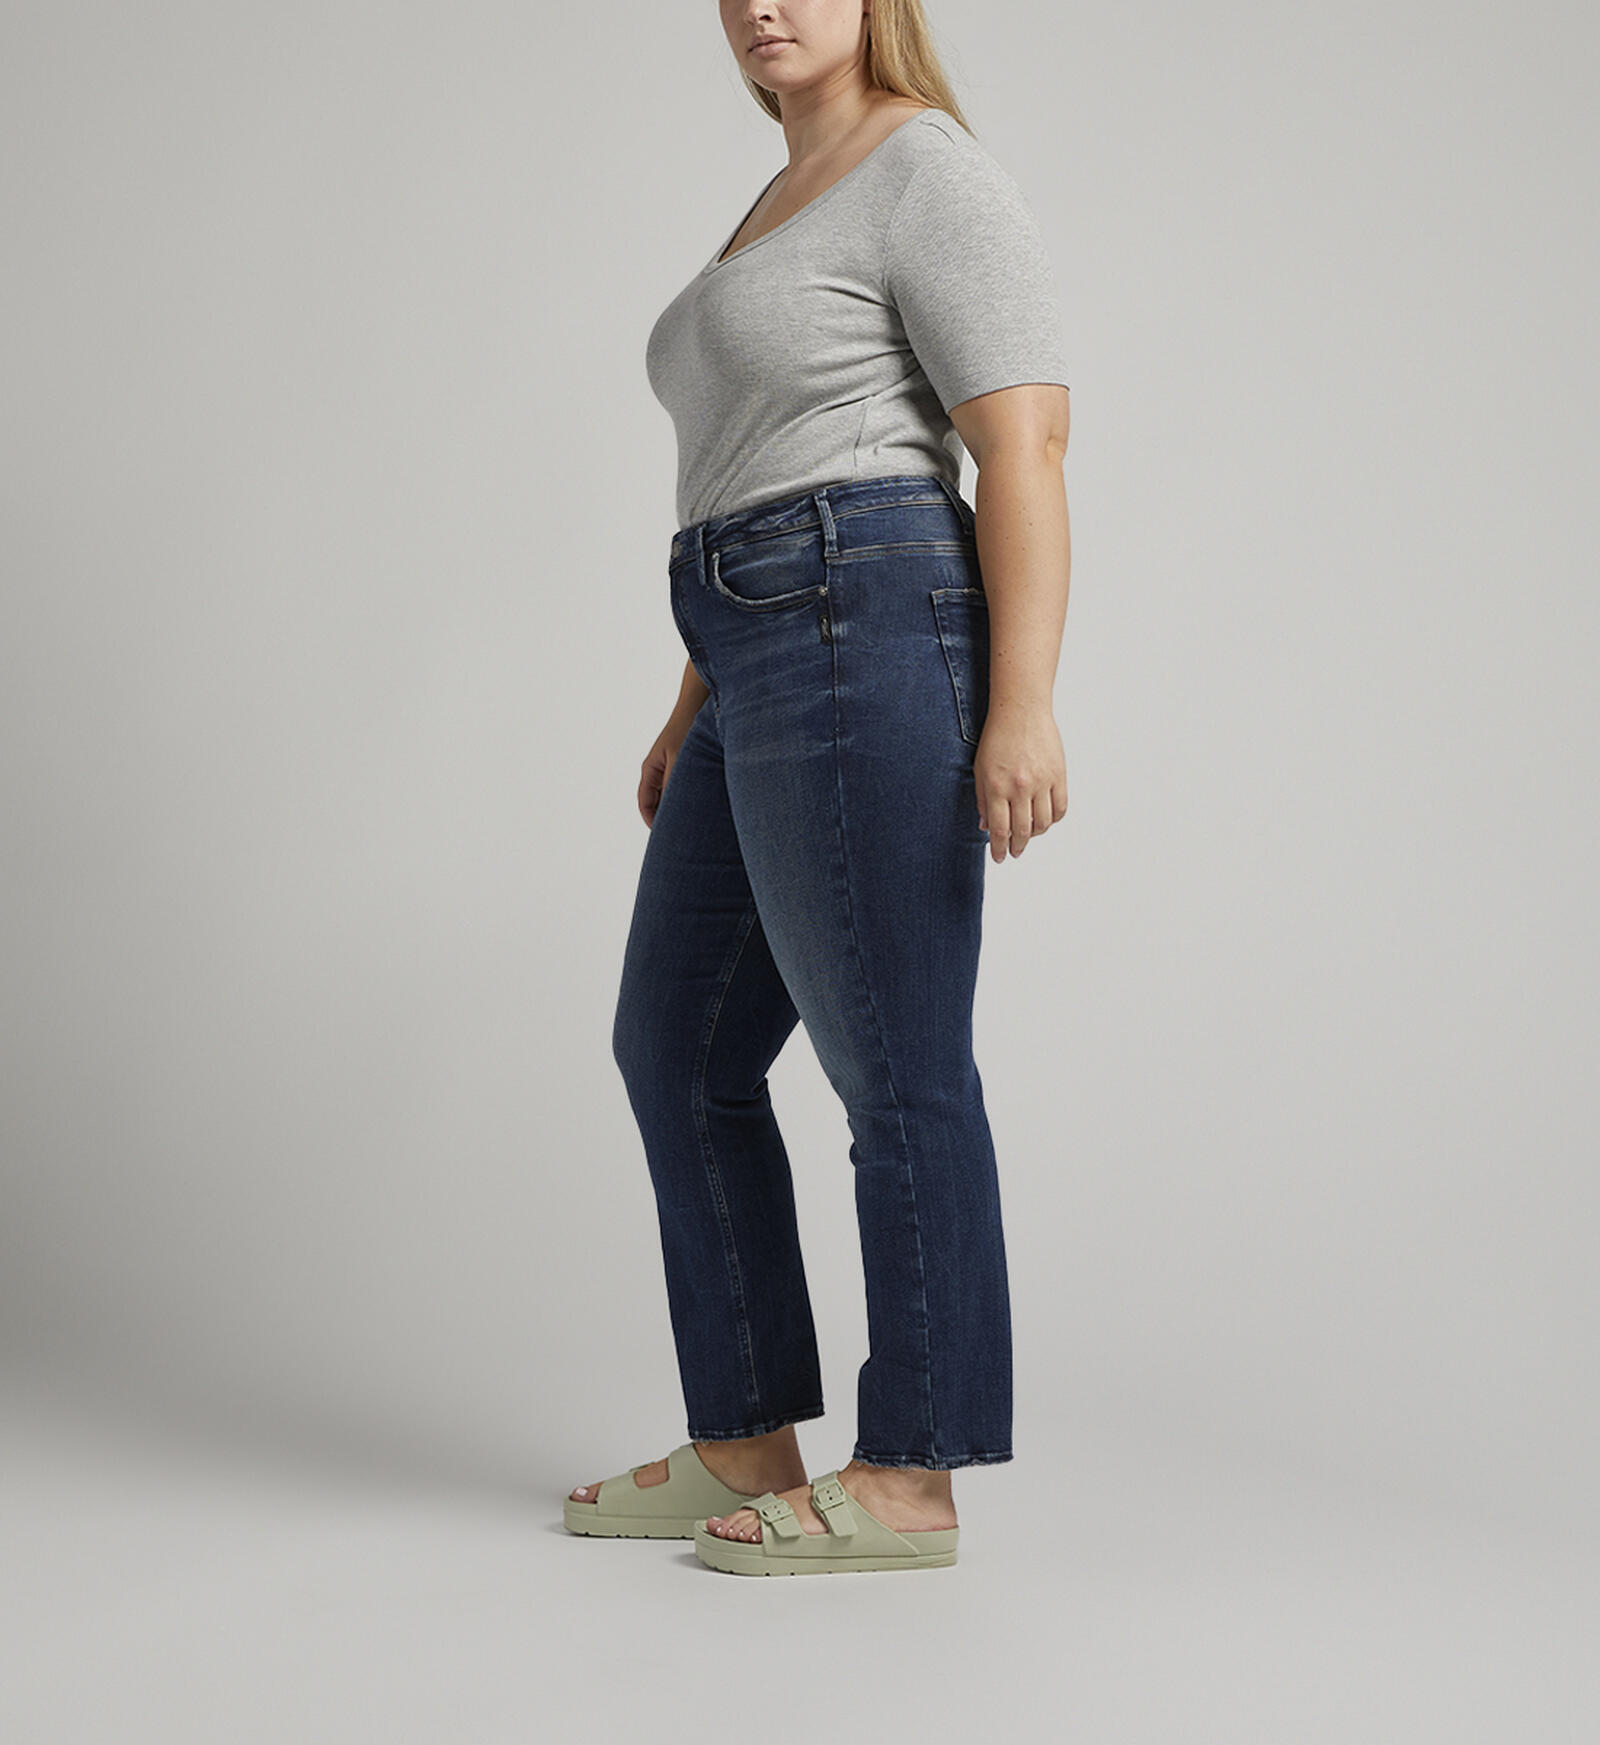 Buy Infinite Fit High Rise Straight Leg Jeans Plus Size for CAD 88.00